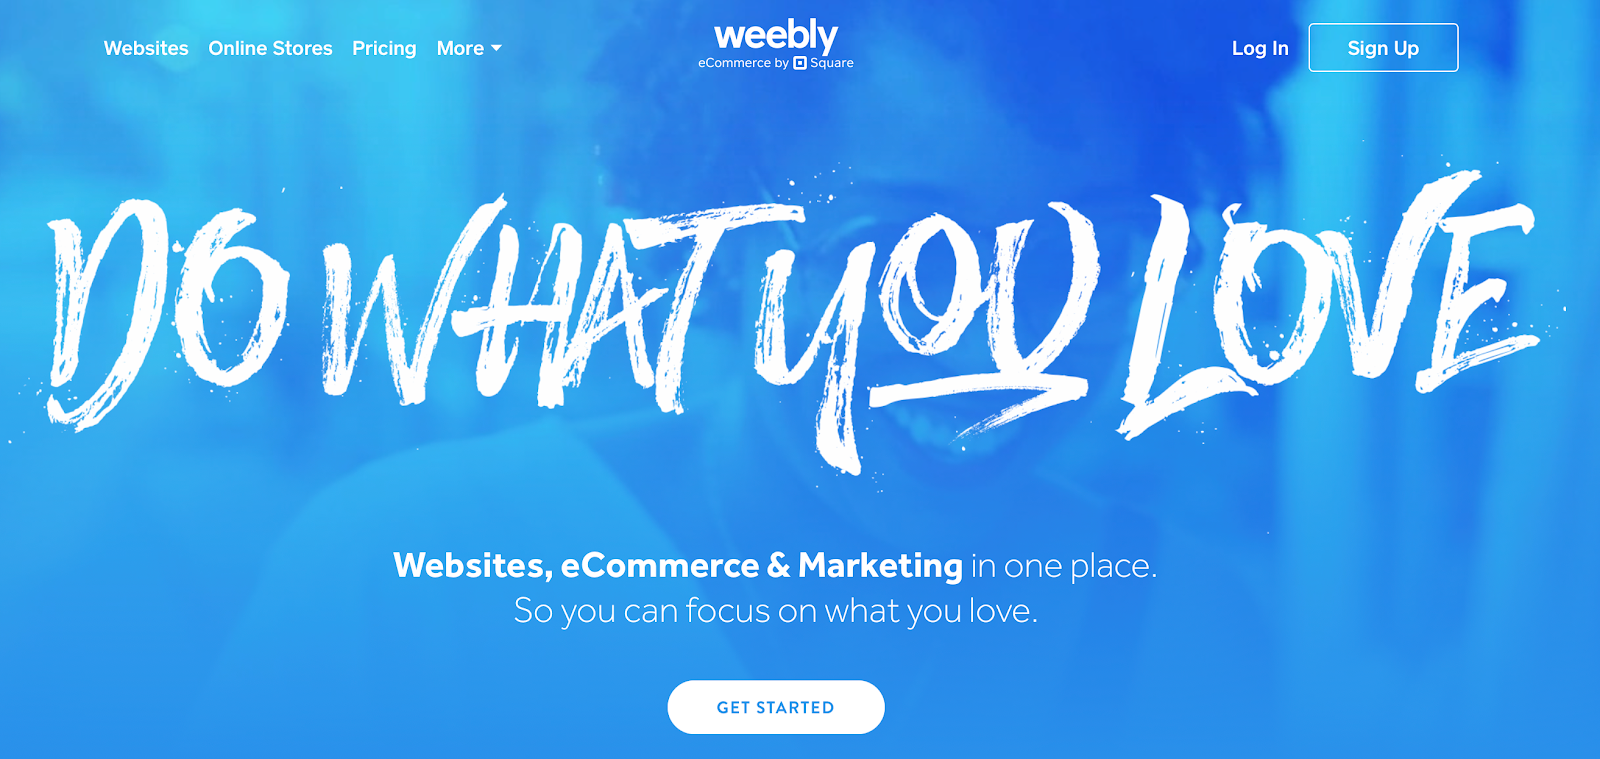 Weebly is a Wix alternative.